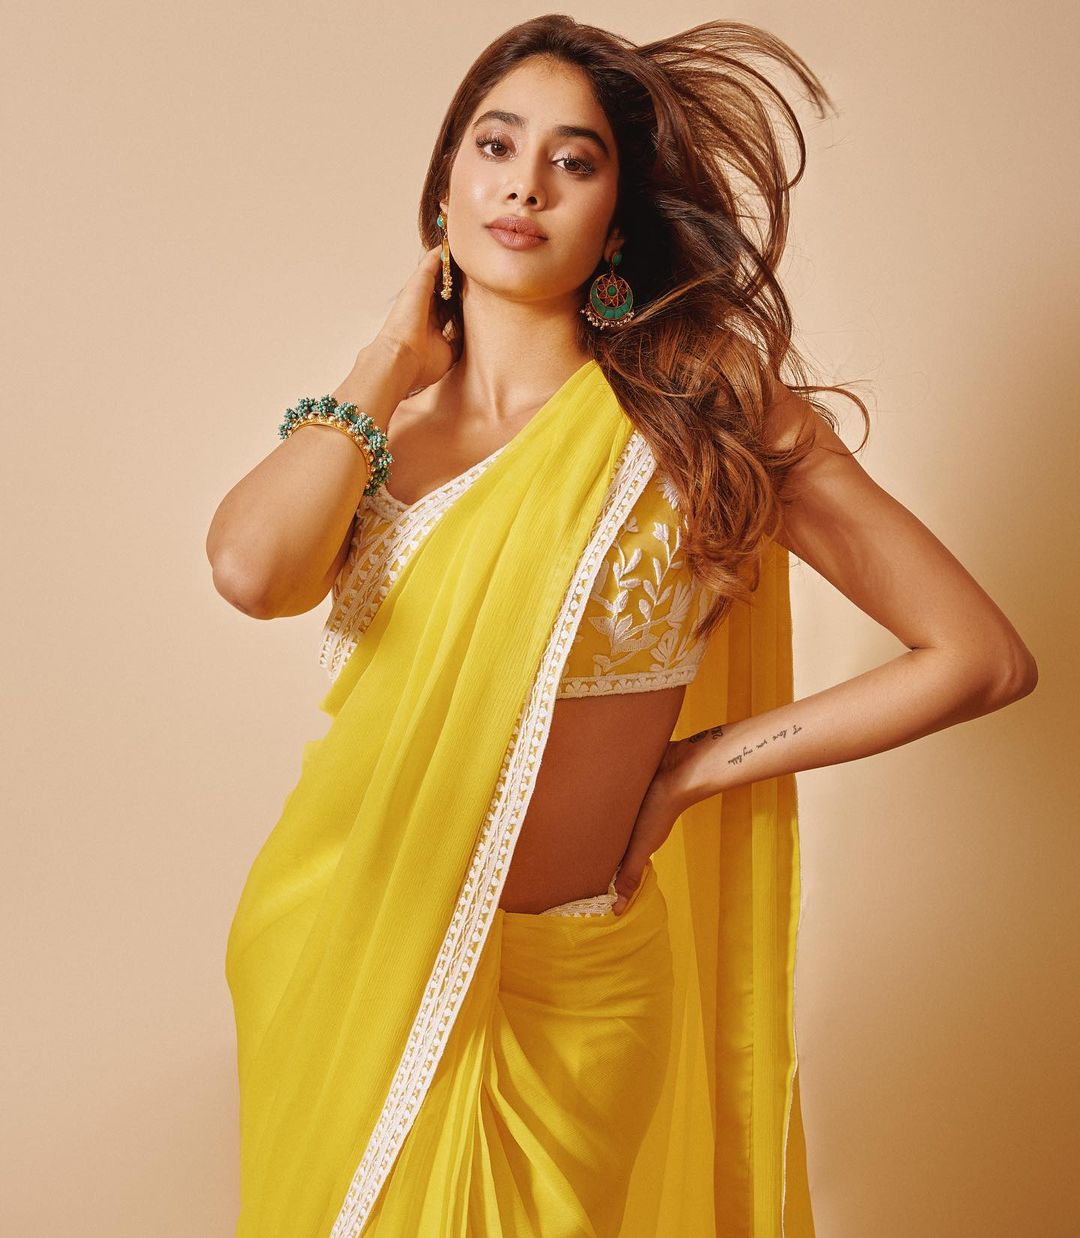 Stunning beauty actress janhvi kapoor hot clicks-Actressjanhvi, Janhvi Kapoor, Janhvikapoor, Telugujanhvi Photos,Spicy Hot Pics,Images,High Resolution WallPapers Download